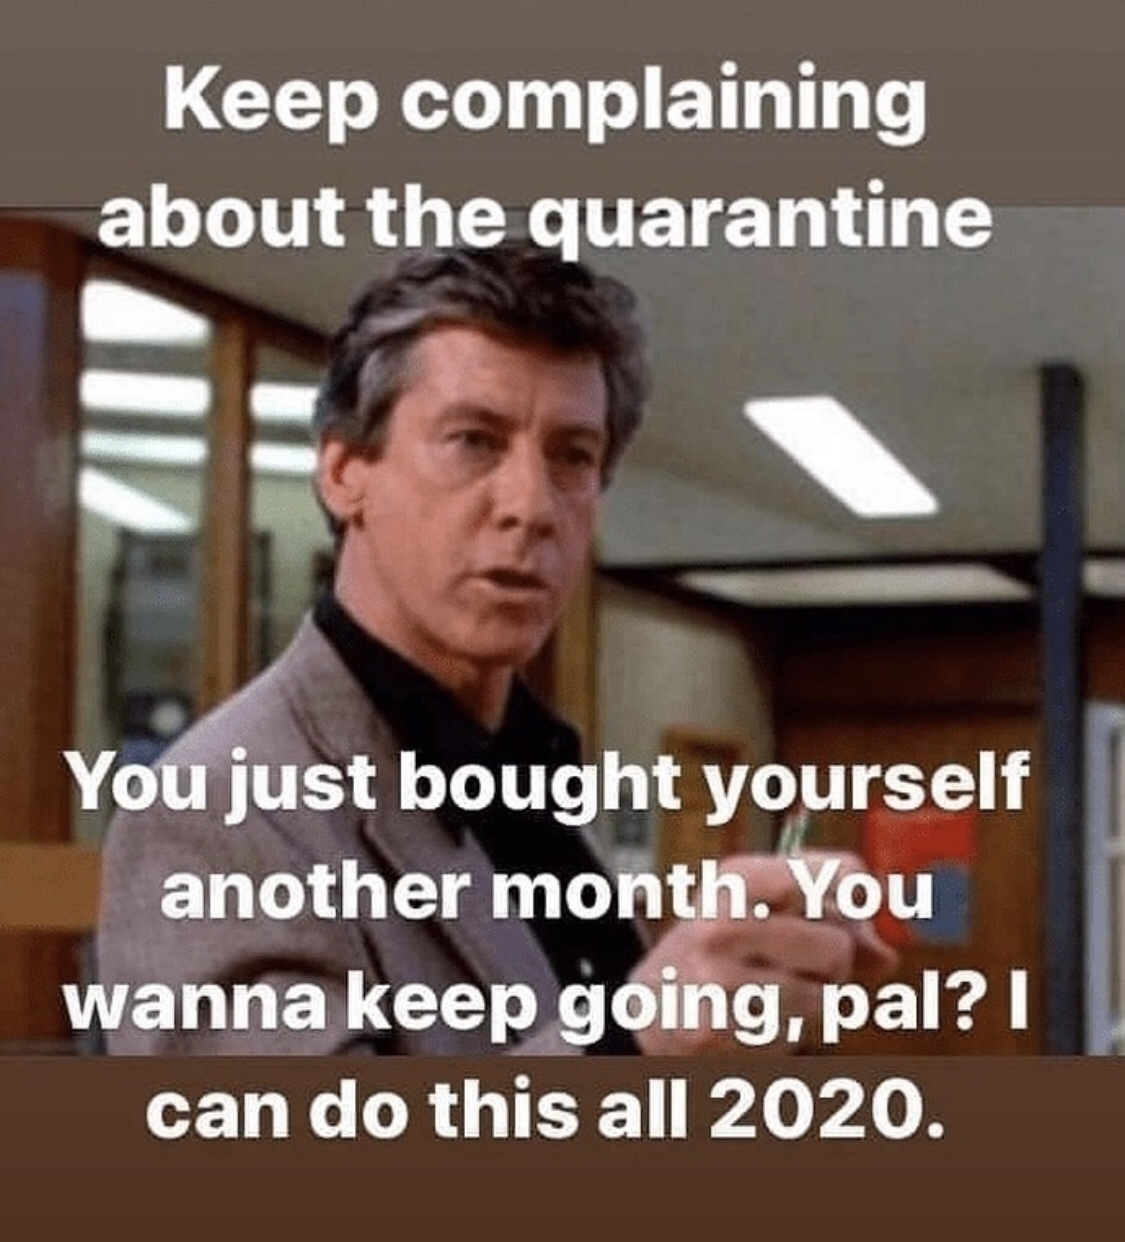 breakfast club principal - Keep complaining about the quarantine You just bought yourself another month. You wanna keep going, pal? || can do this all 2020.